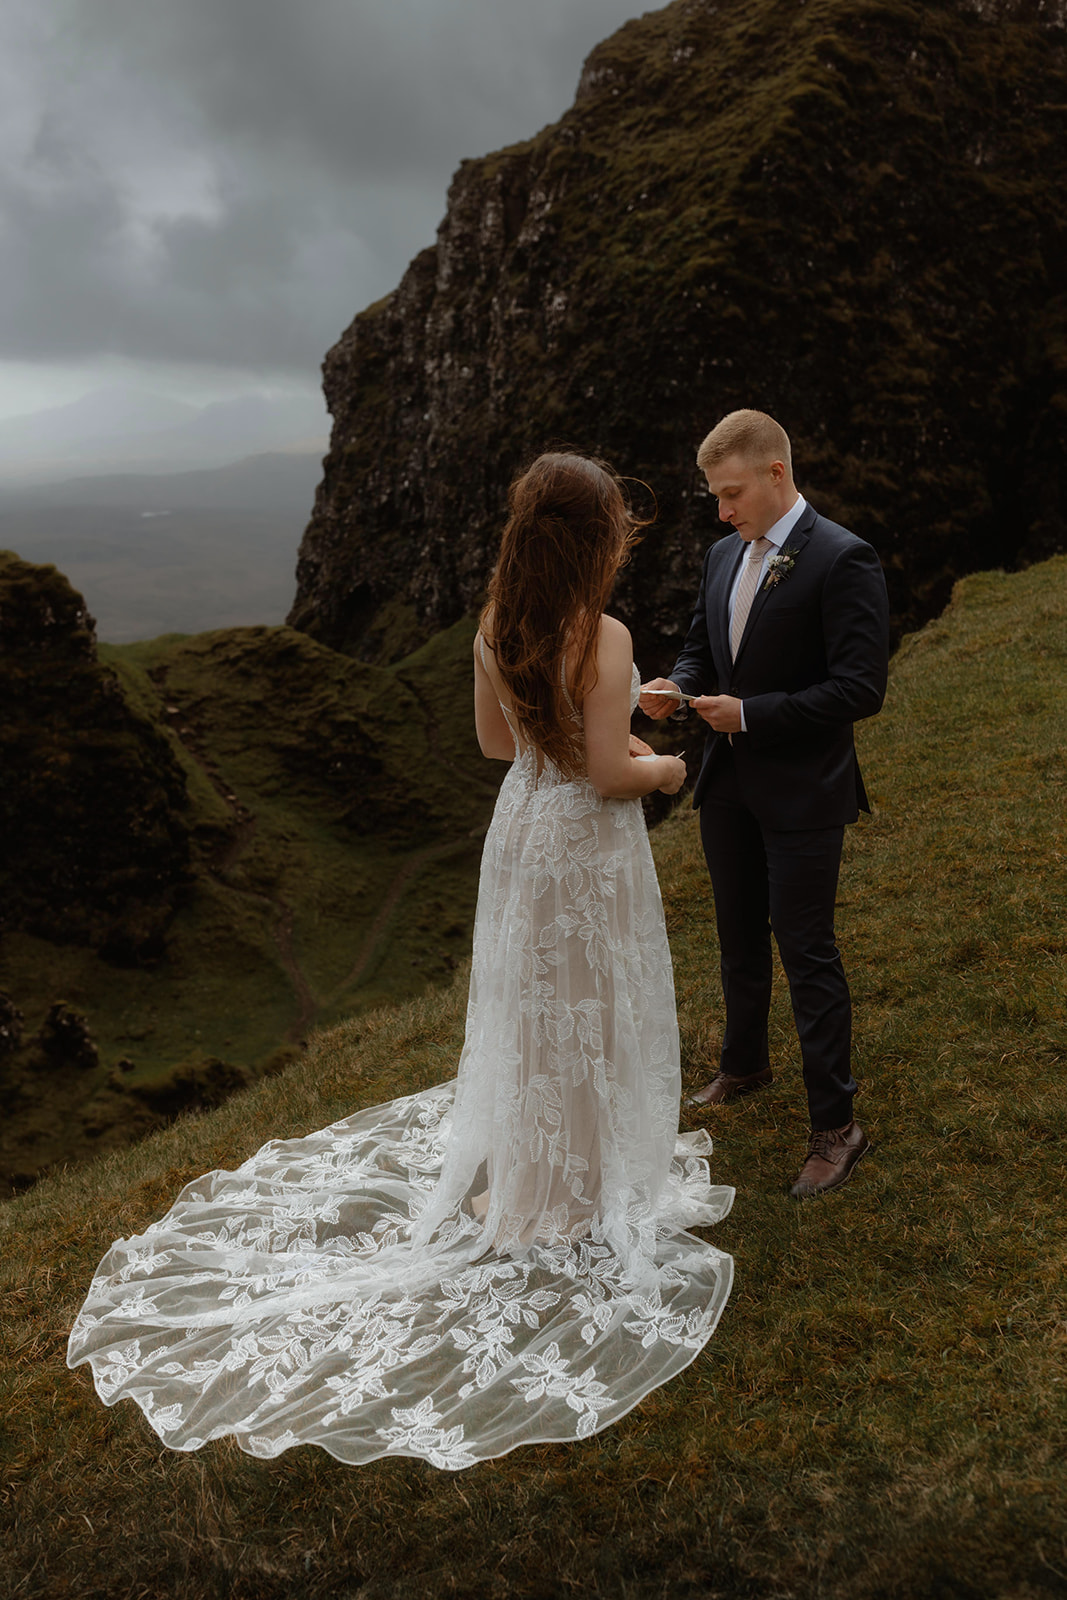 Emma and Matthew shared their vows to each other during their Isle of Skye elopement ceremony